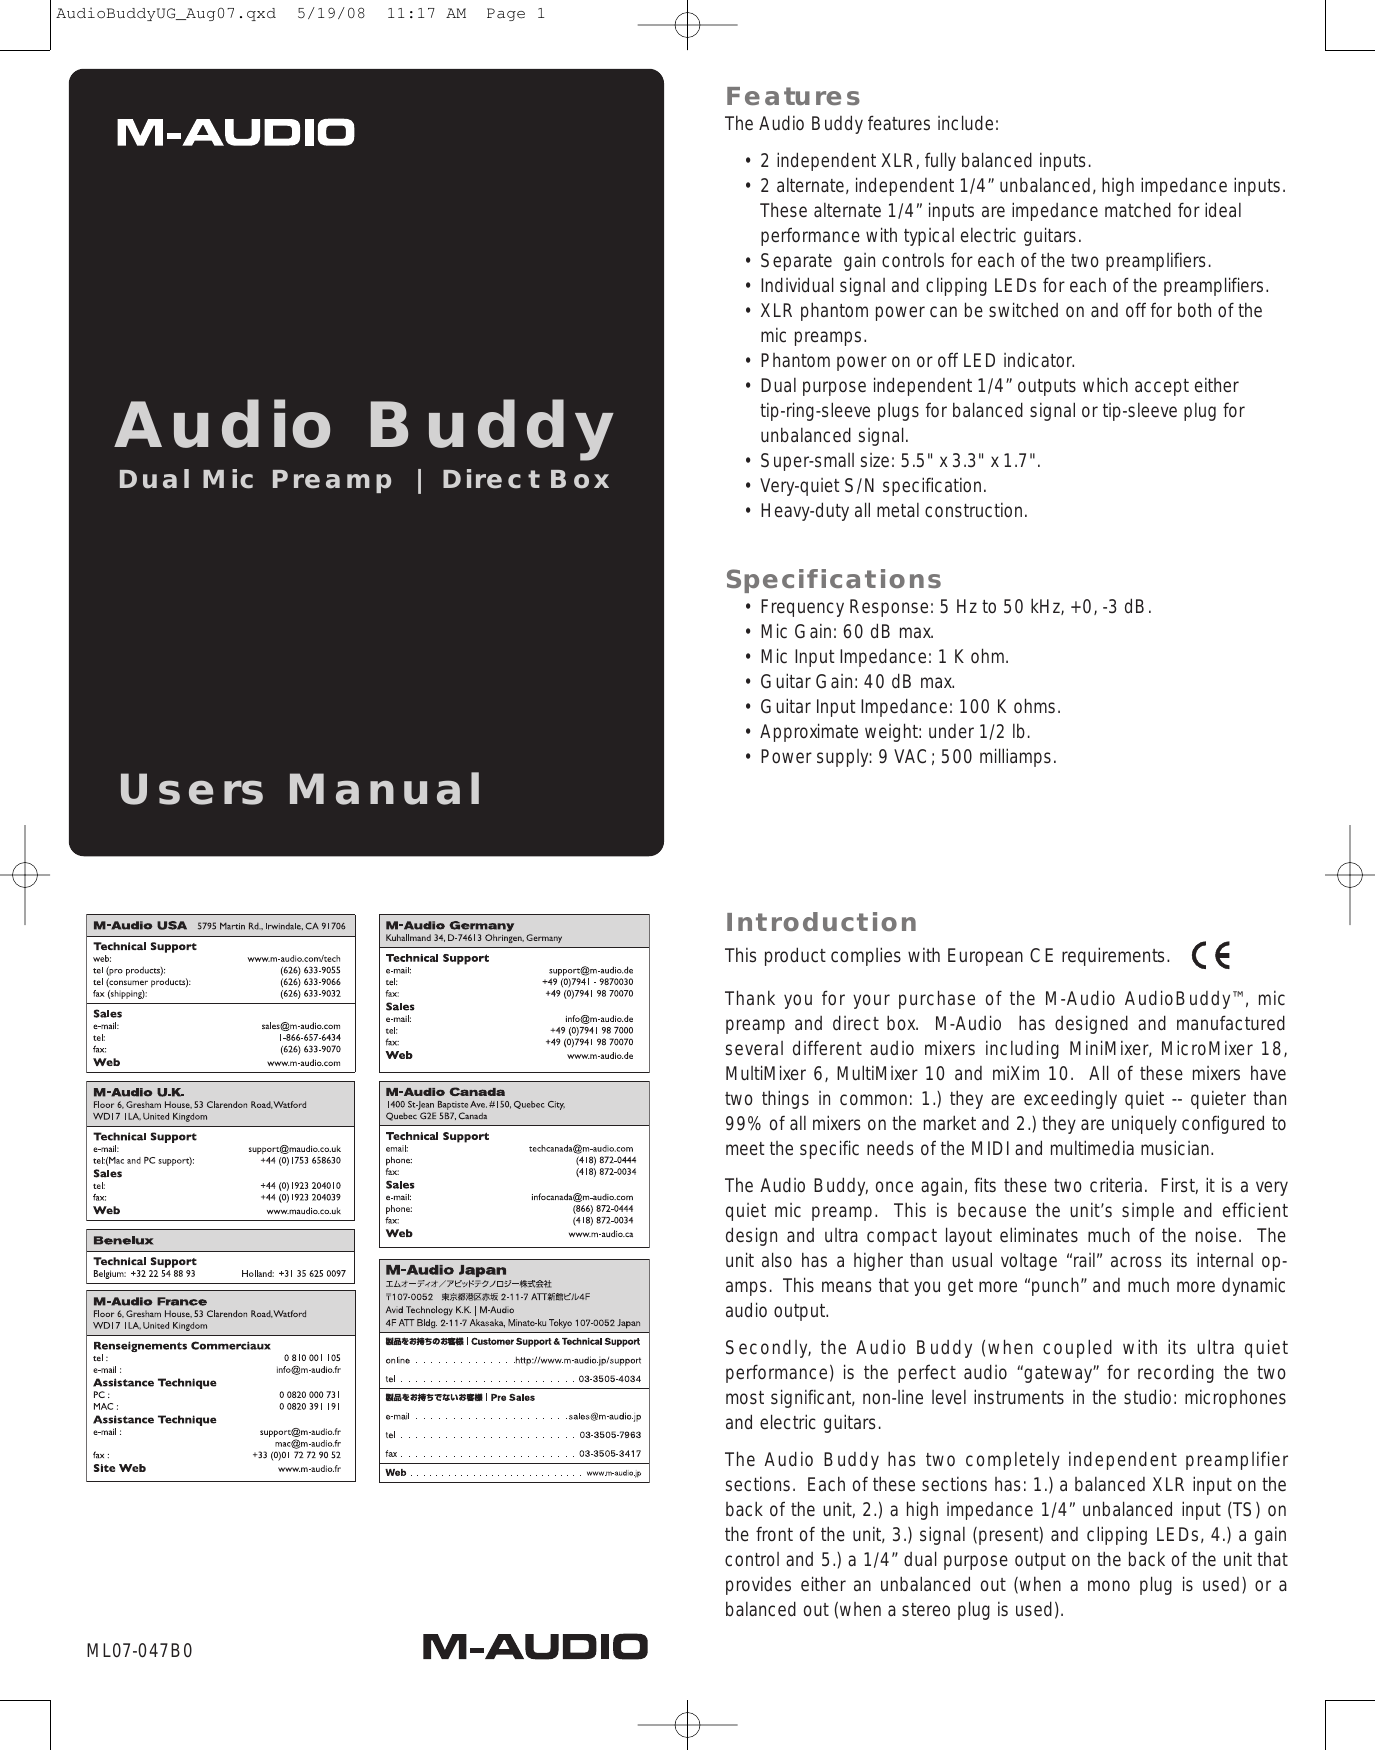 Page 2 of 8 - M-Audio M-Audio-Audio-Buddy-Dual-Mic-Preamp-Users-Manual- Audio Buddy User Guide  M-audio-audio-buddy-dual-mic-preamp-users-manual